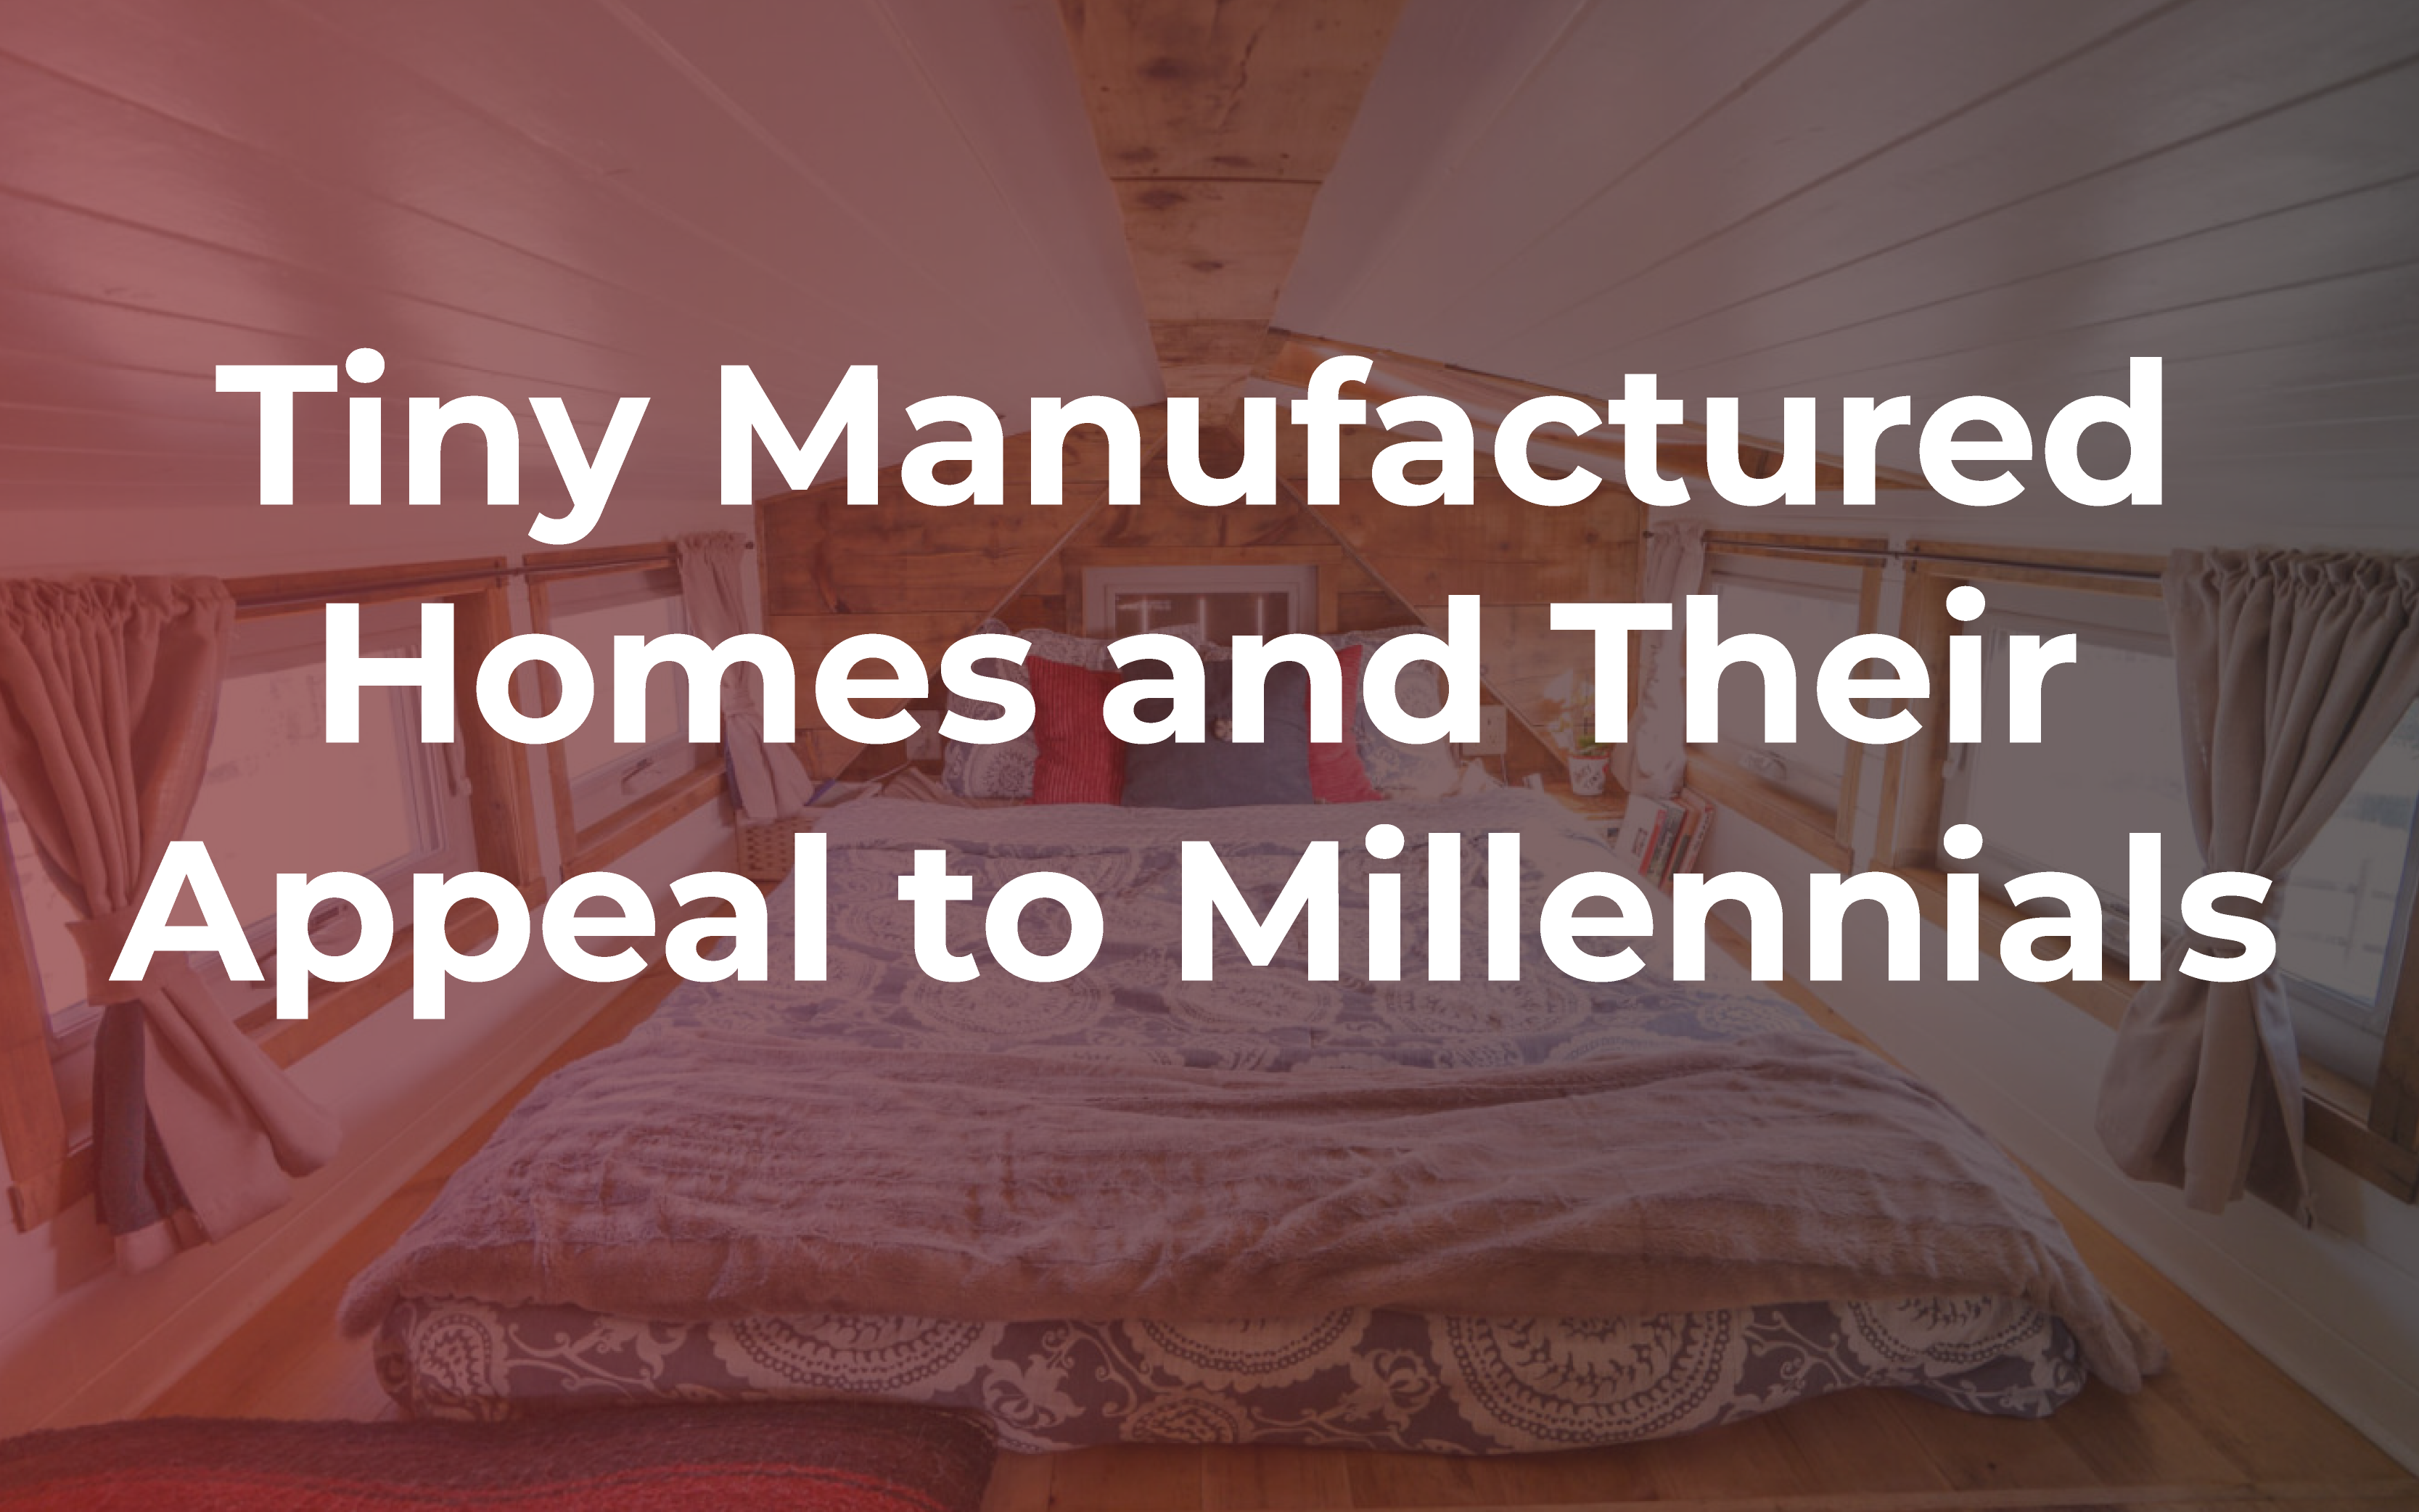 Tiny Manufactured Homes and Their Appeal to Millennials